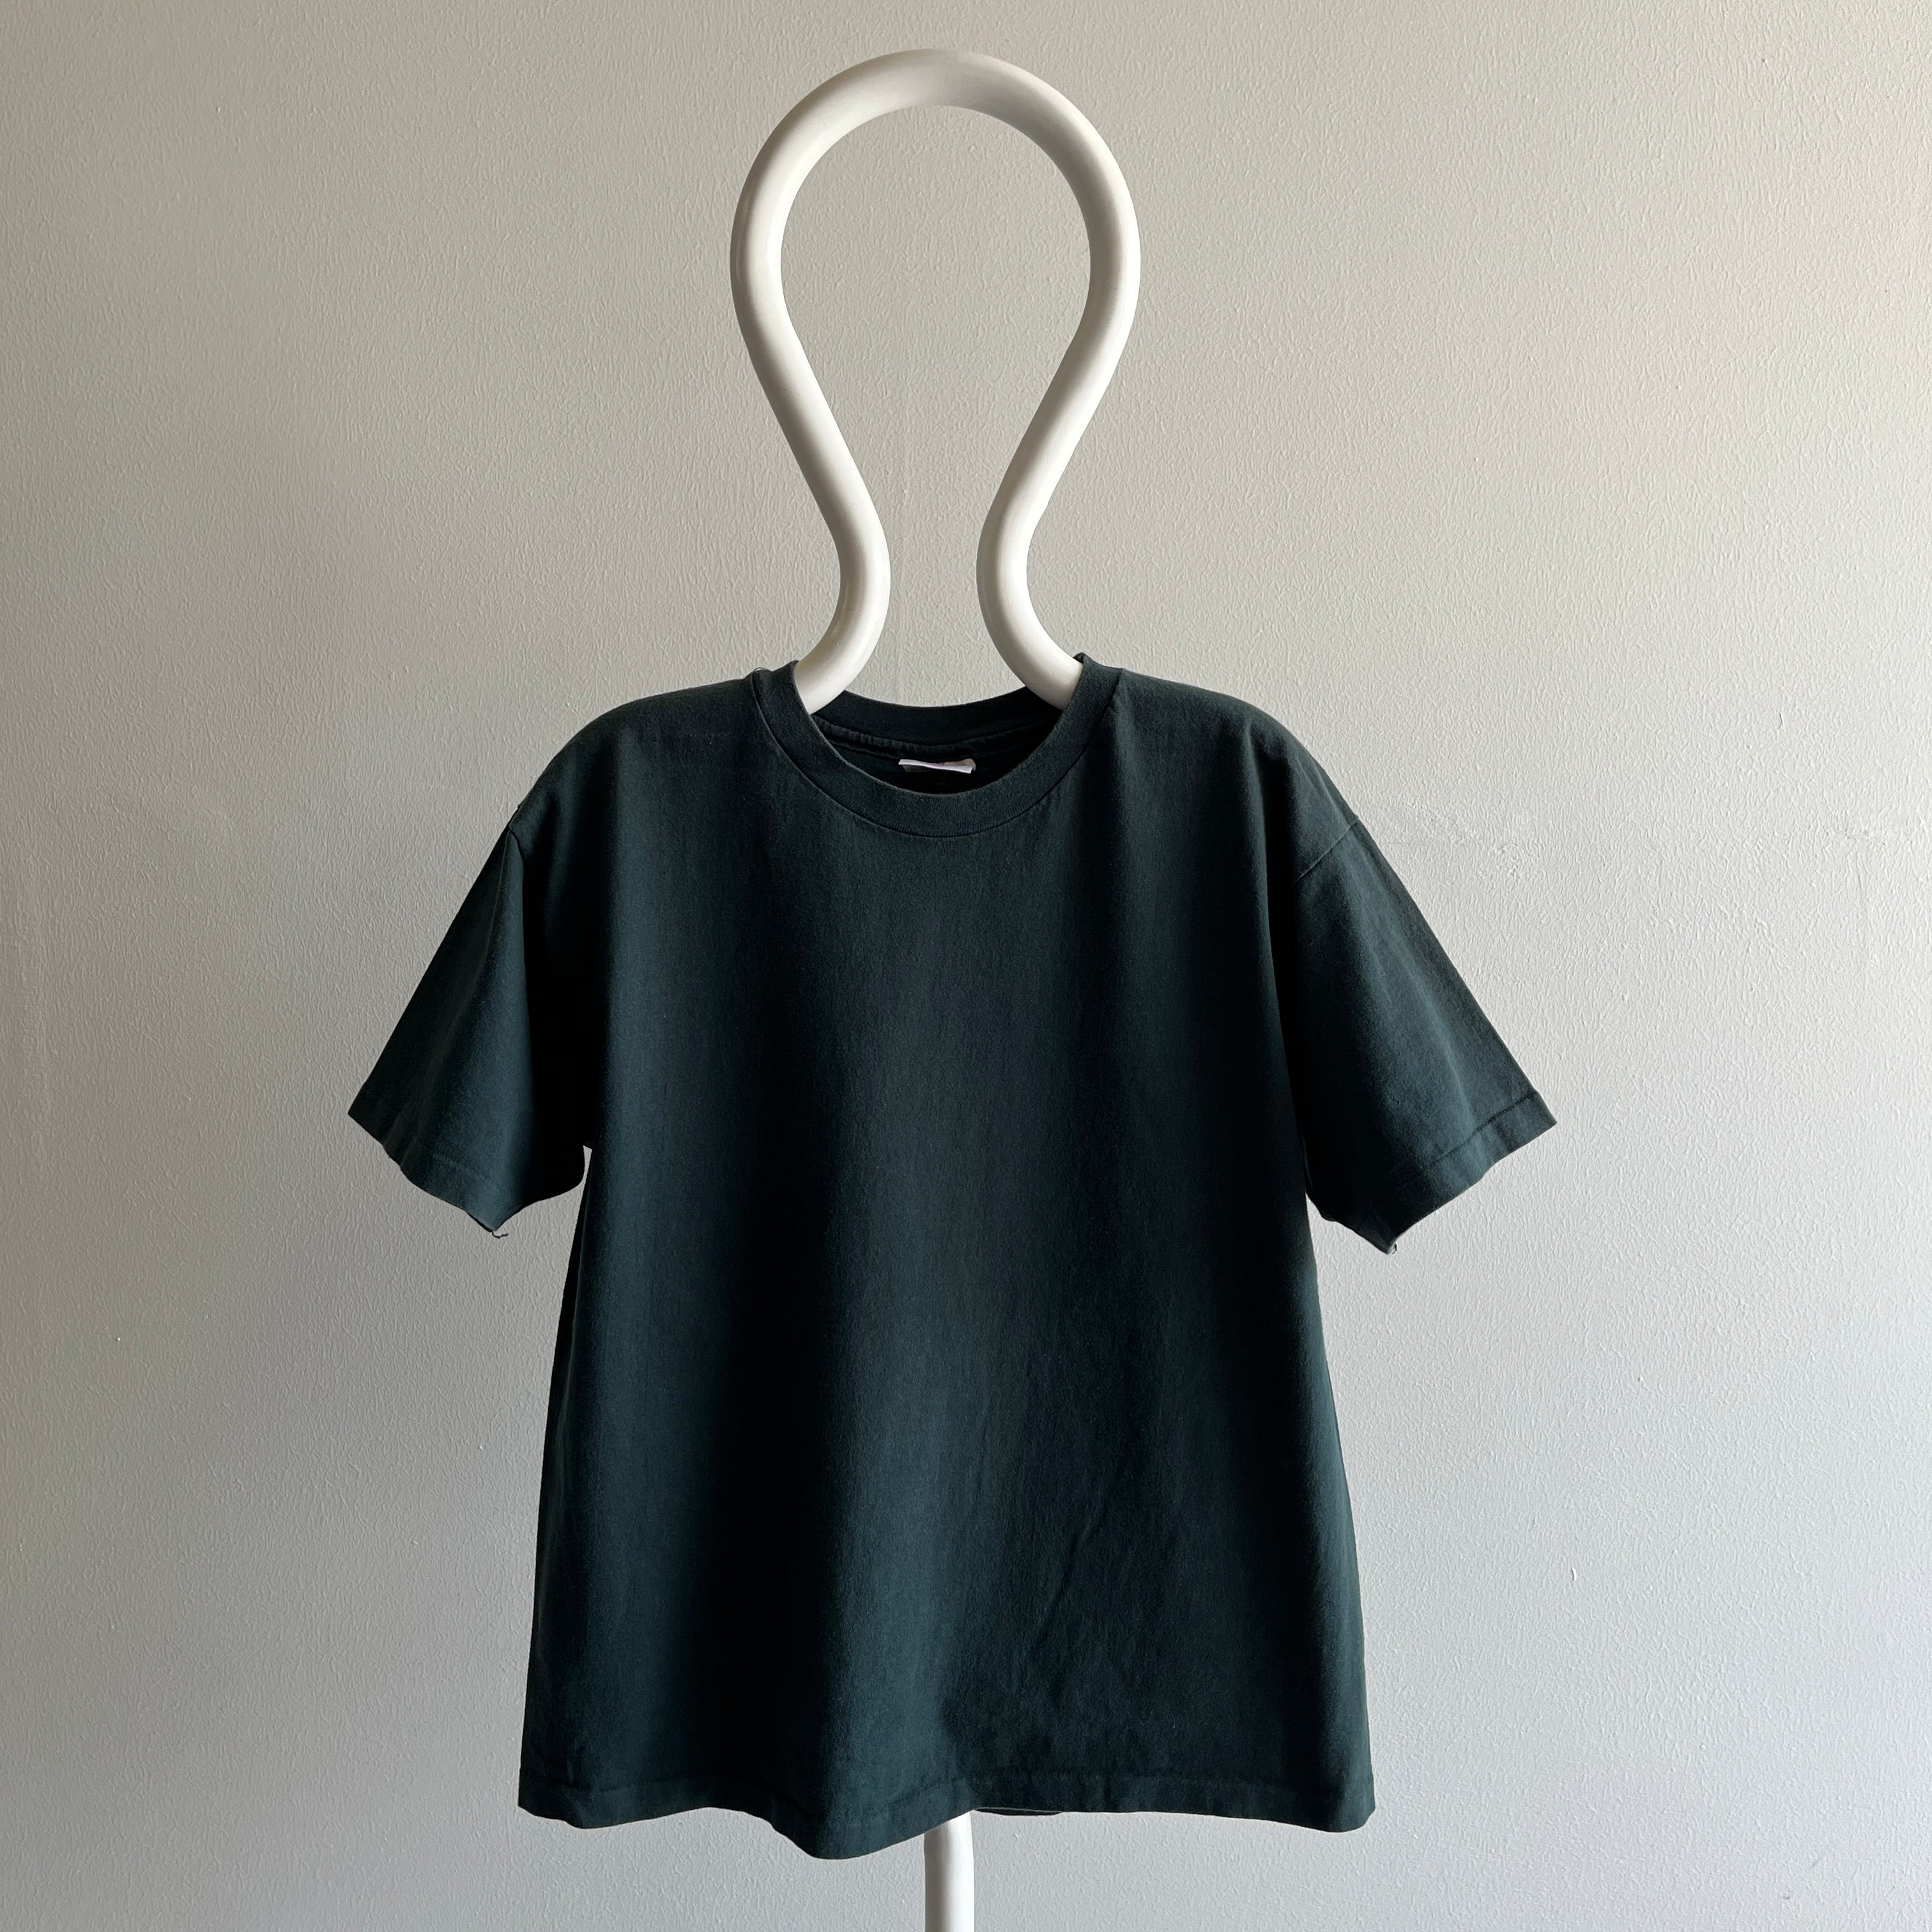 1990s Cotton Faded Black (Or a Dark Dusty Jade? I Can't Tell) T-Shirt